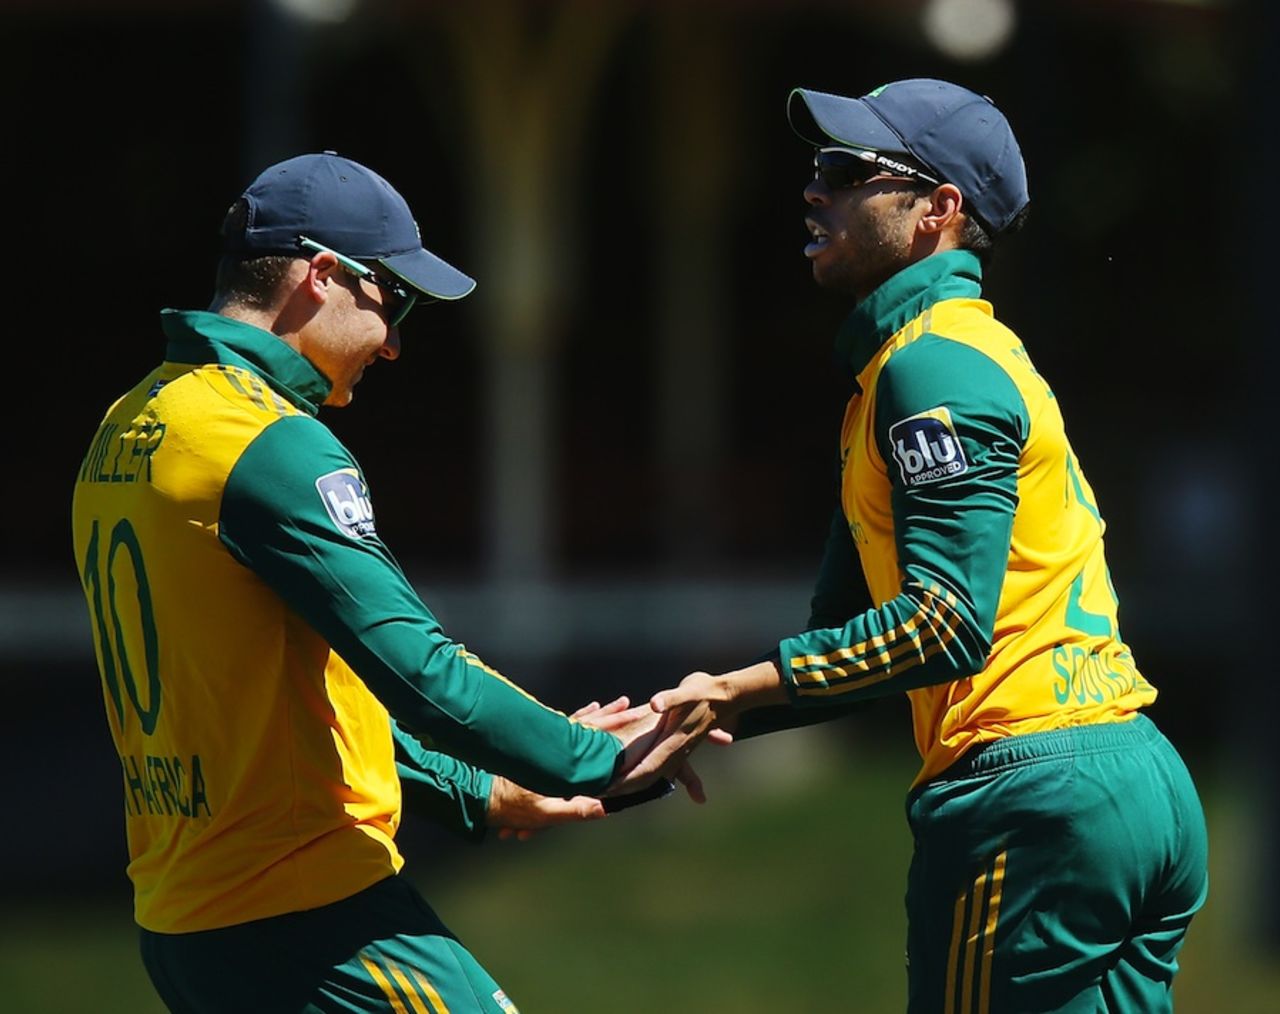 David Miller and Farhaan Behardien celebrate a wicket, CA XI v South Africans, North Sydney Oval, November 2, 2014